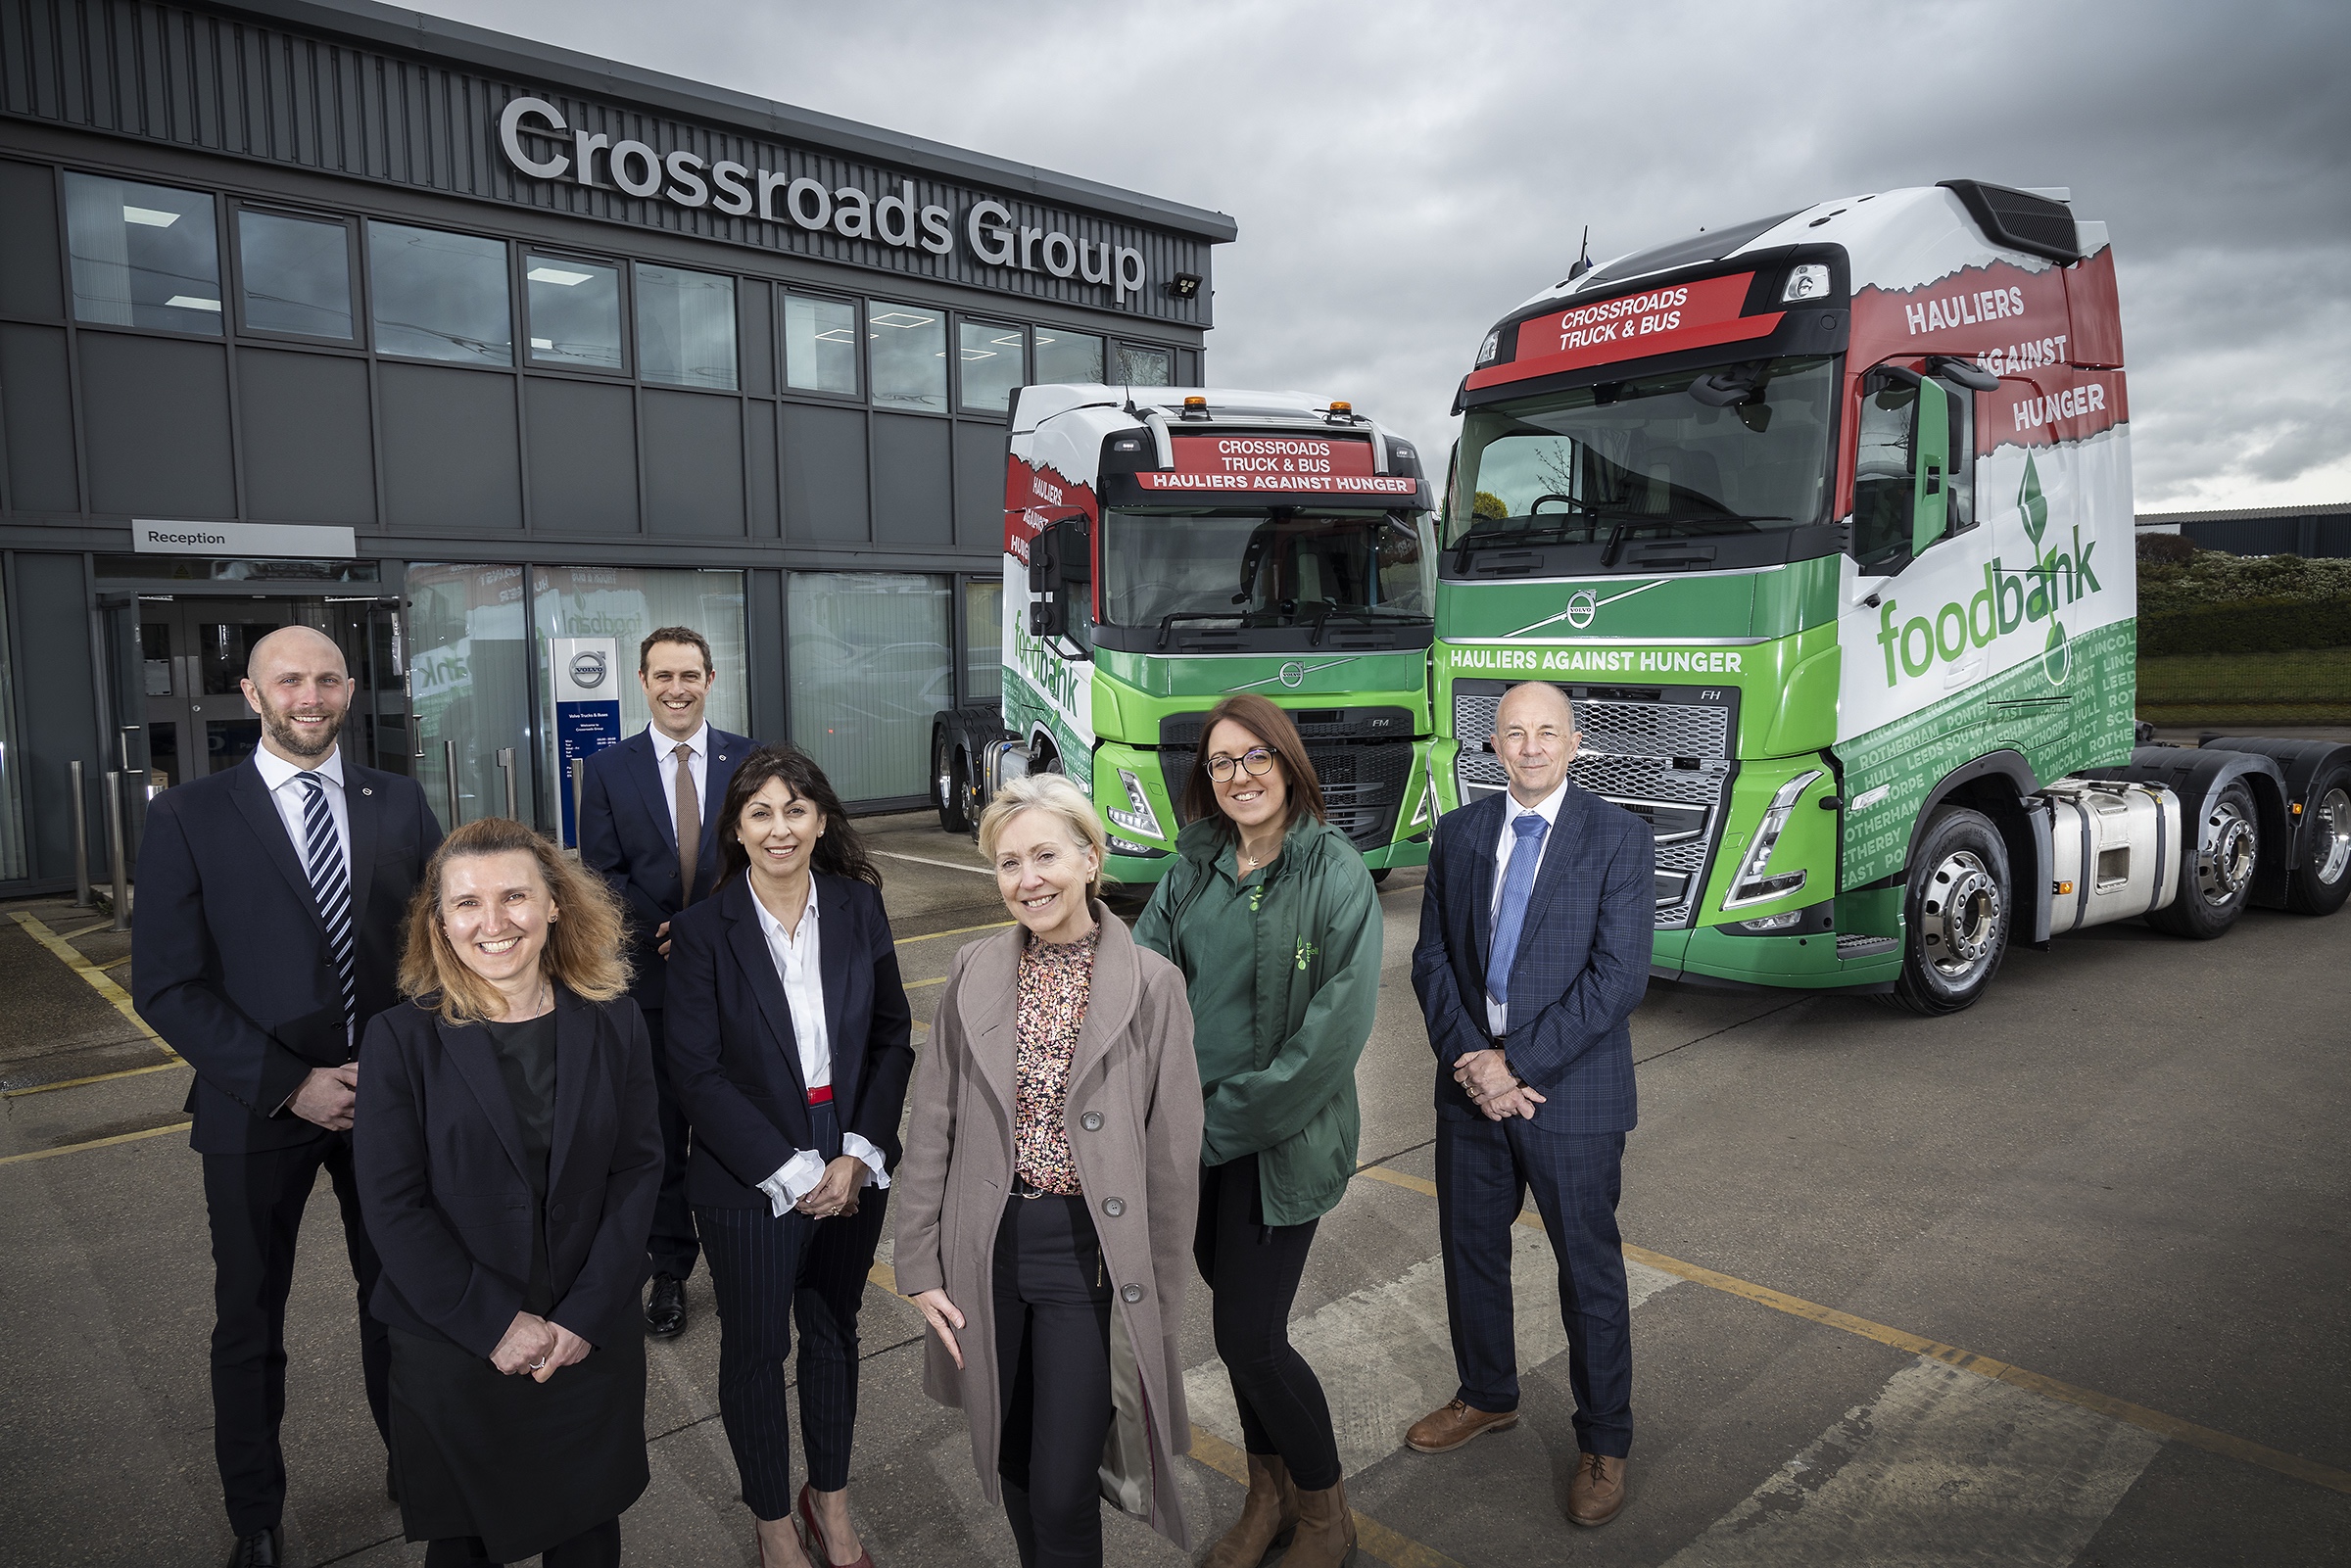 'Hauliers against hunger' launches to support community food banks